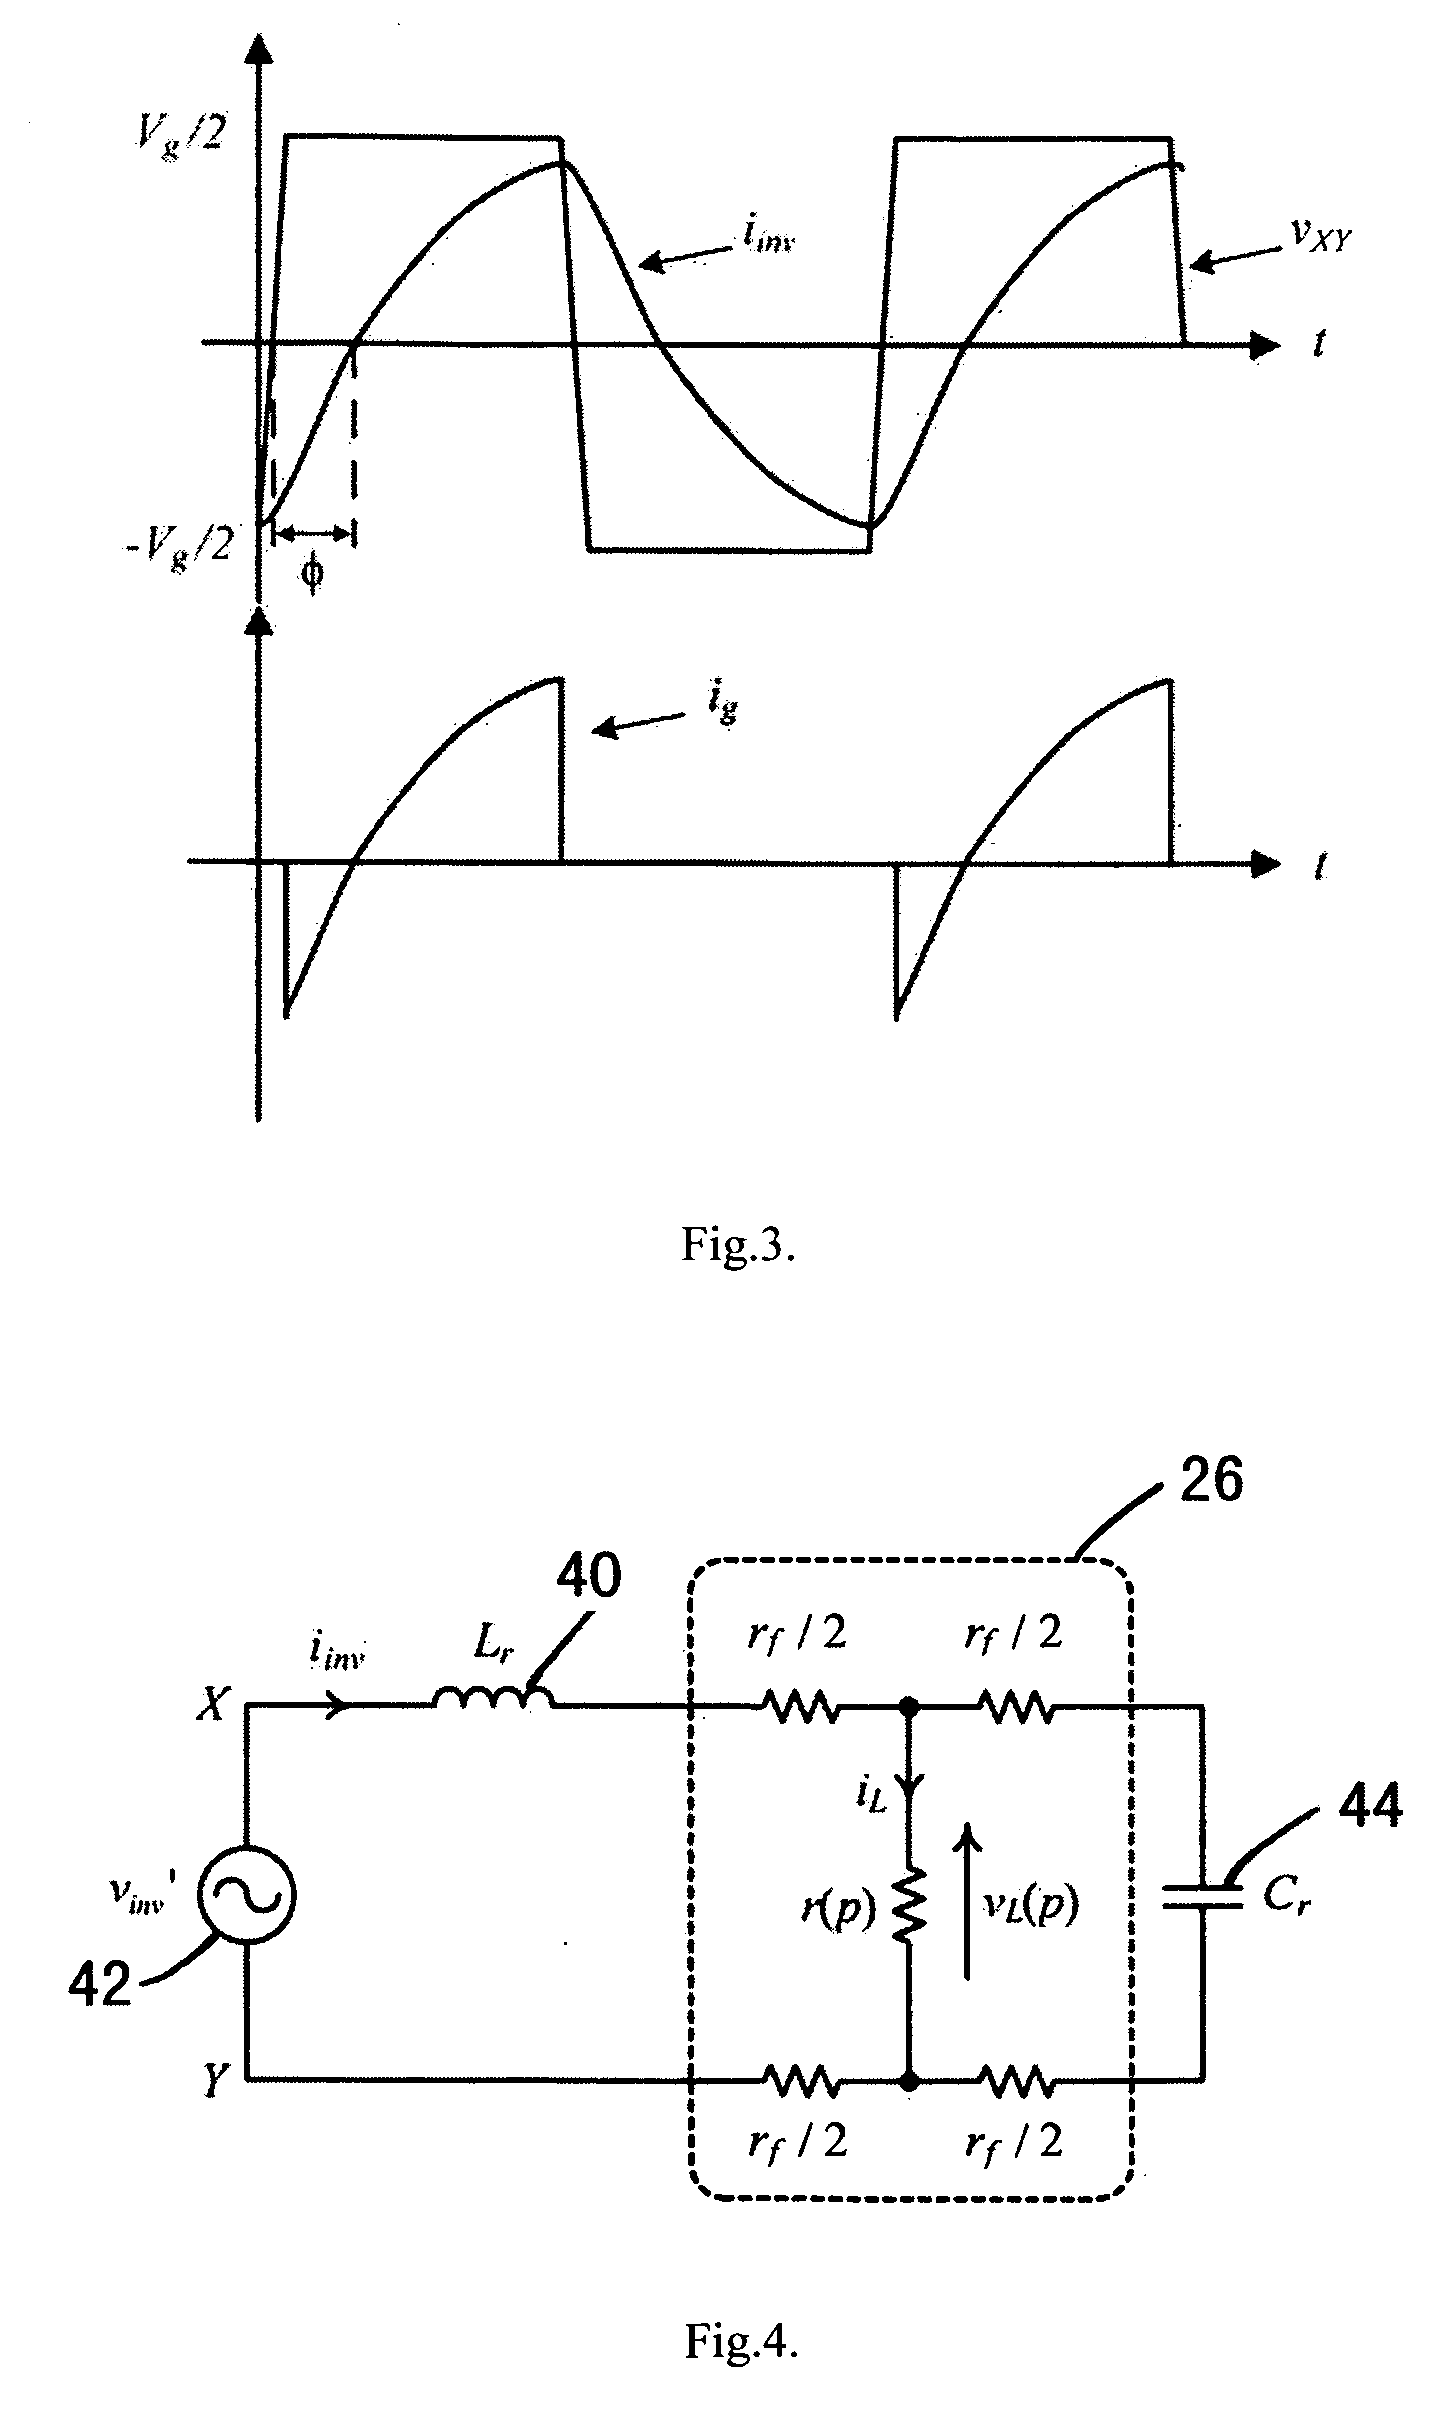 Apparatus or circuit for driving a DC powered lighting equipment